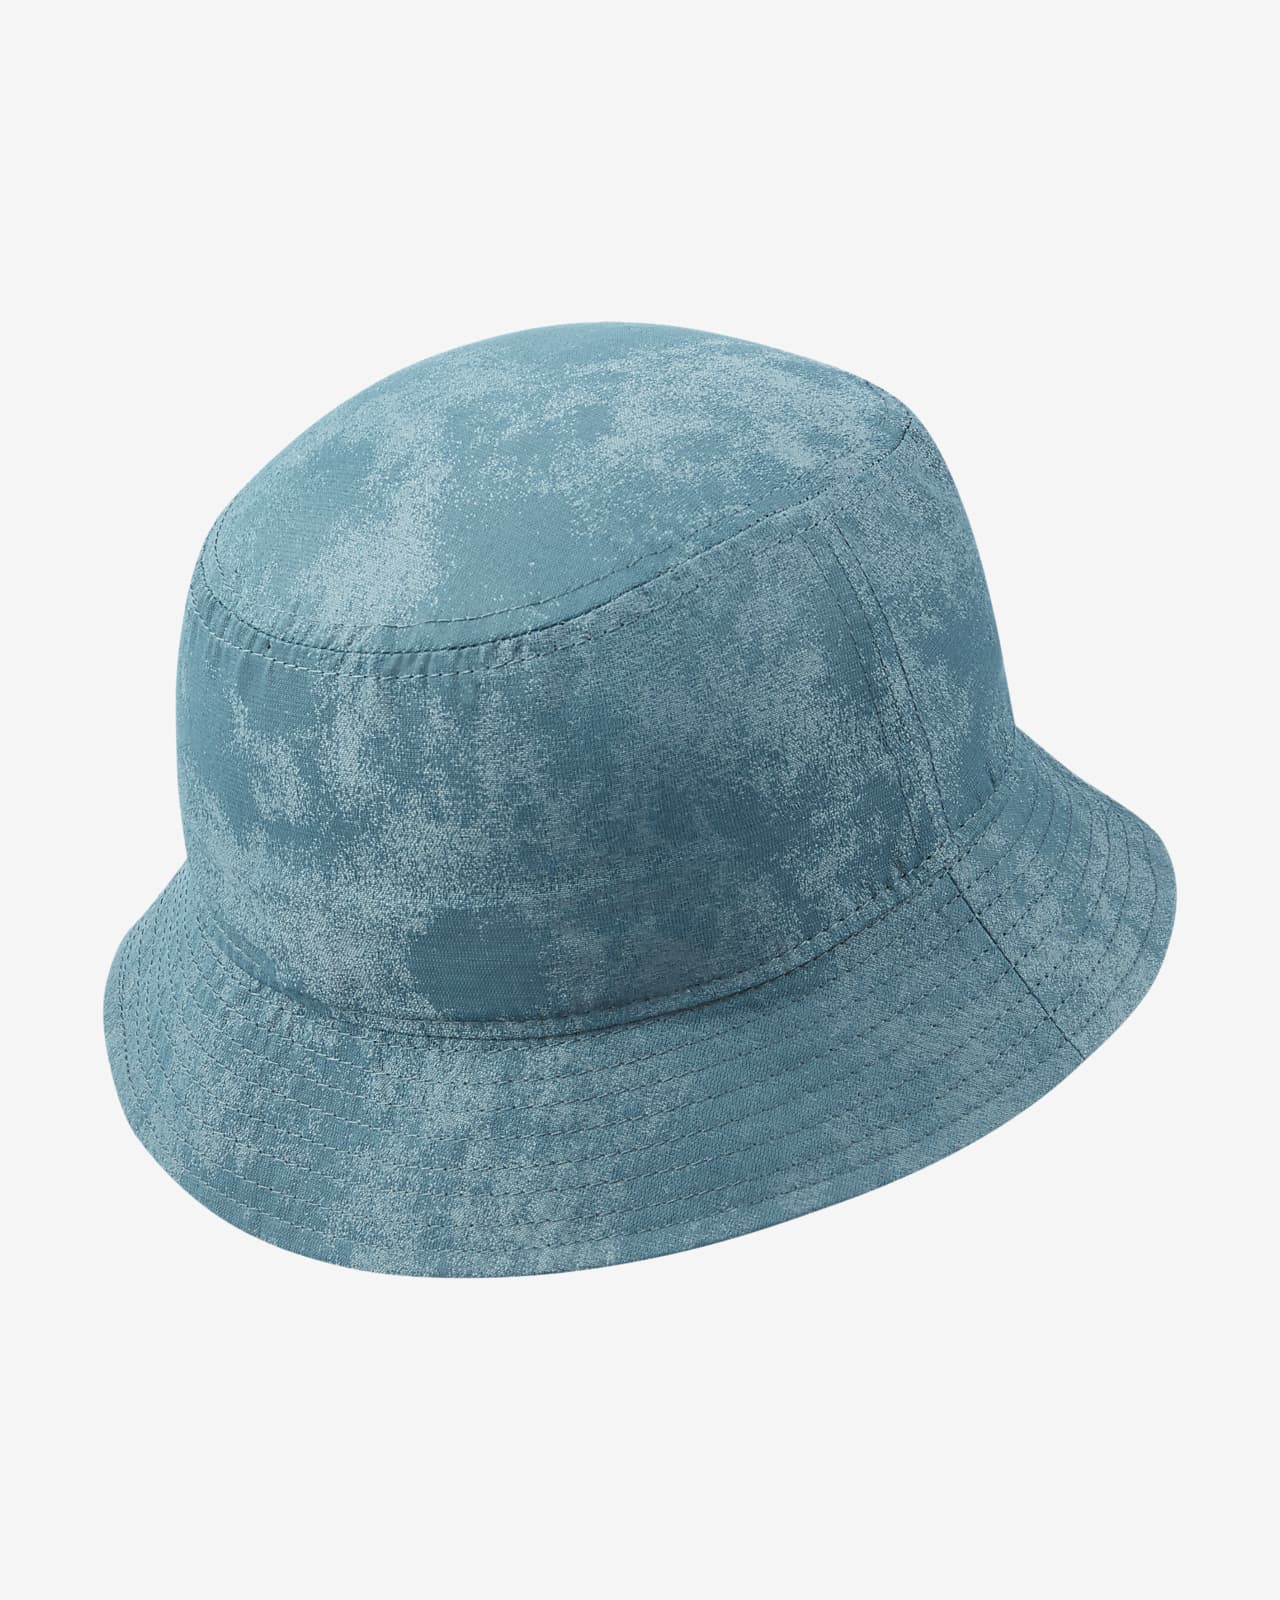 Custom Bucket Hats With String: Design Your Own Screen, 44% OFF